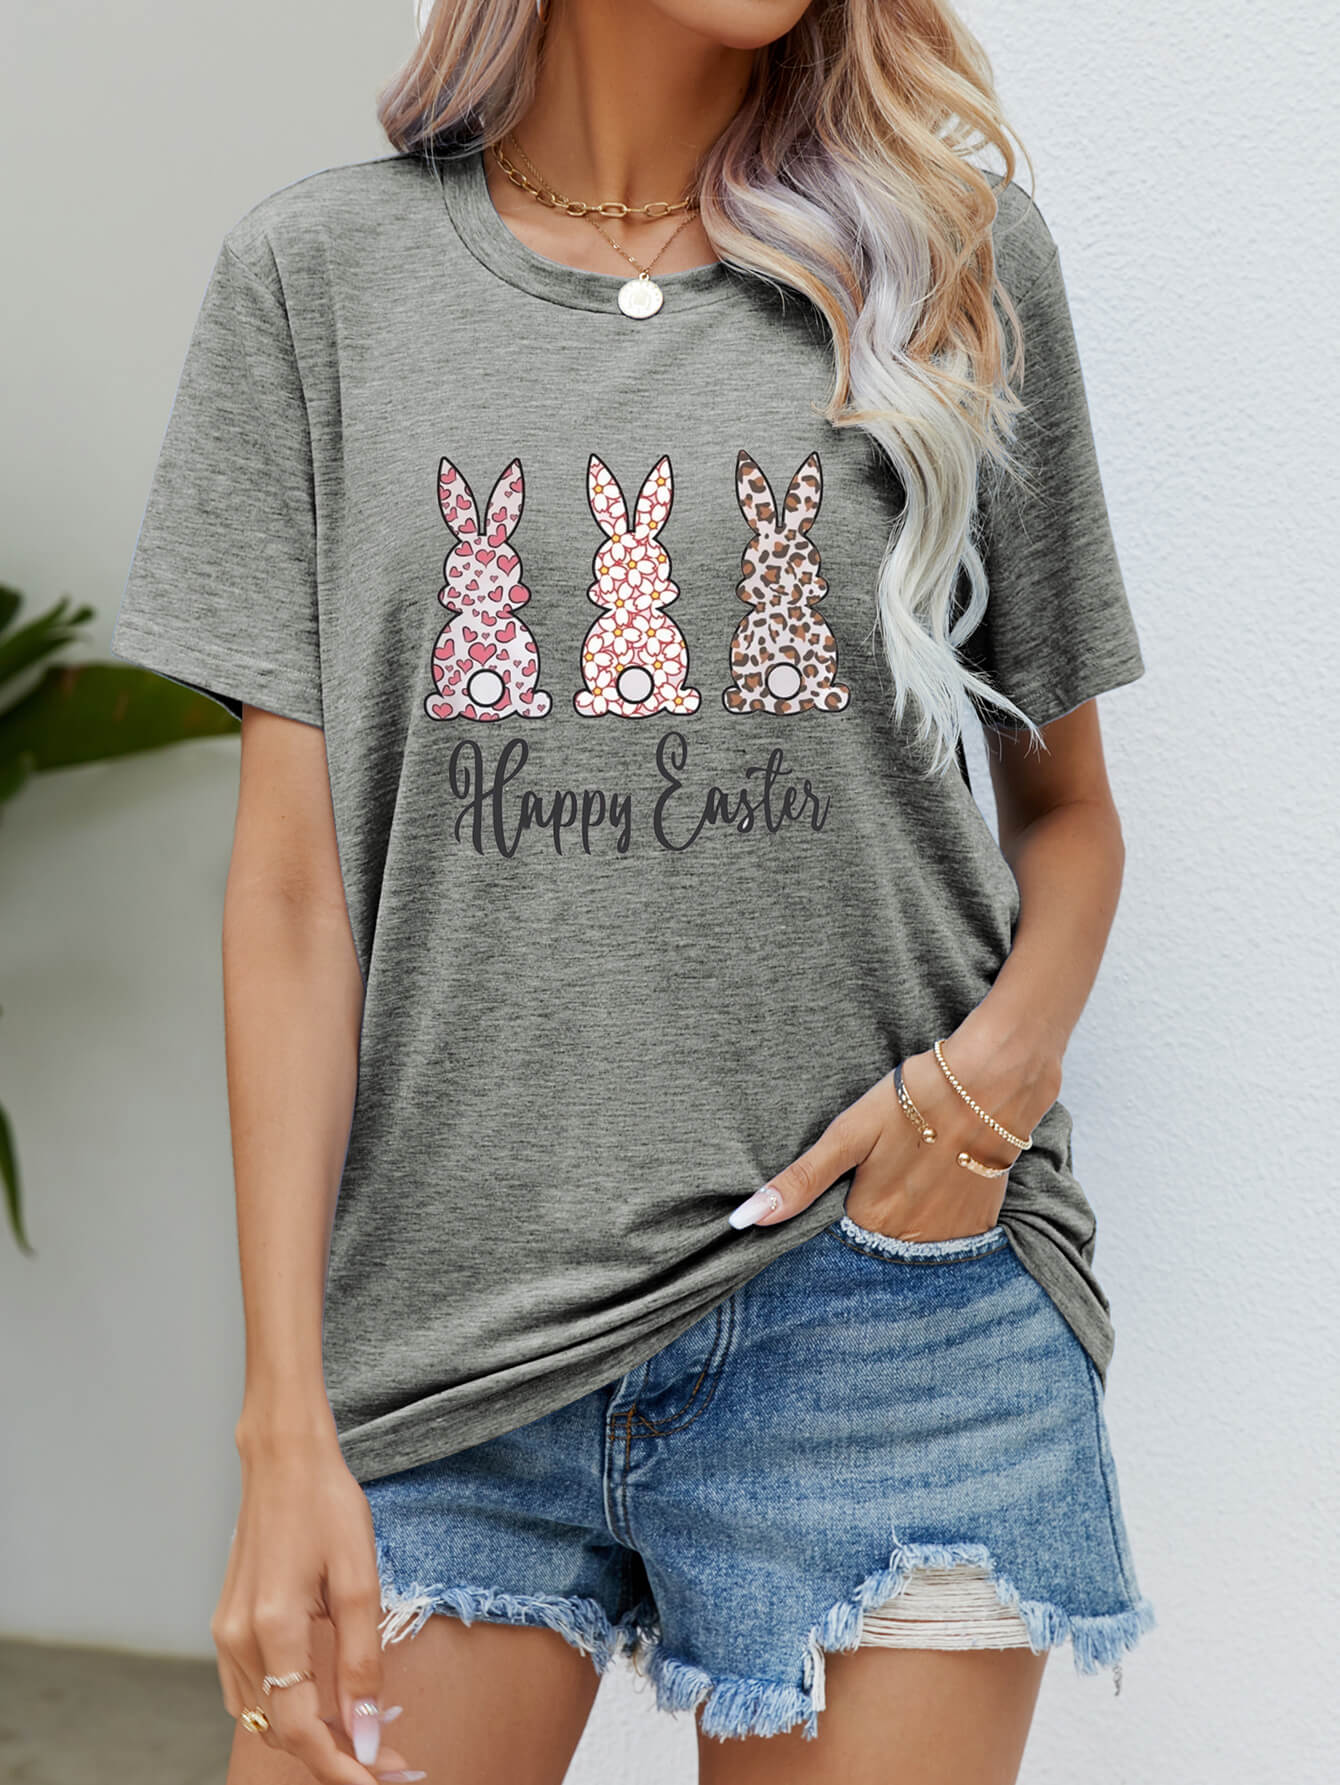 HAPPY EASTER Graphic Short Sleeve Tee - Gray / S - T-Shirts - Shirts & Tops - 10 - 2024